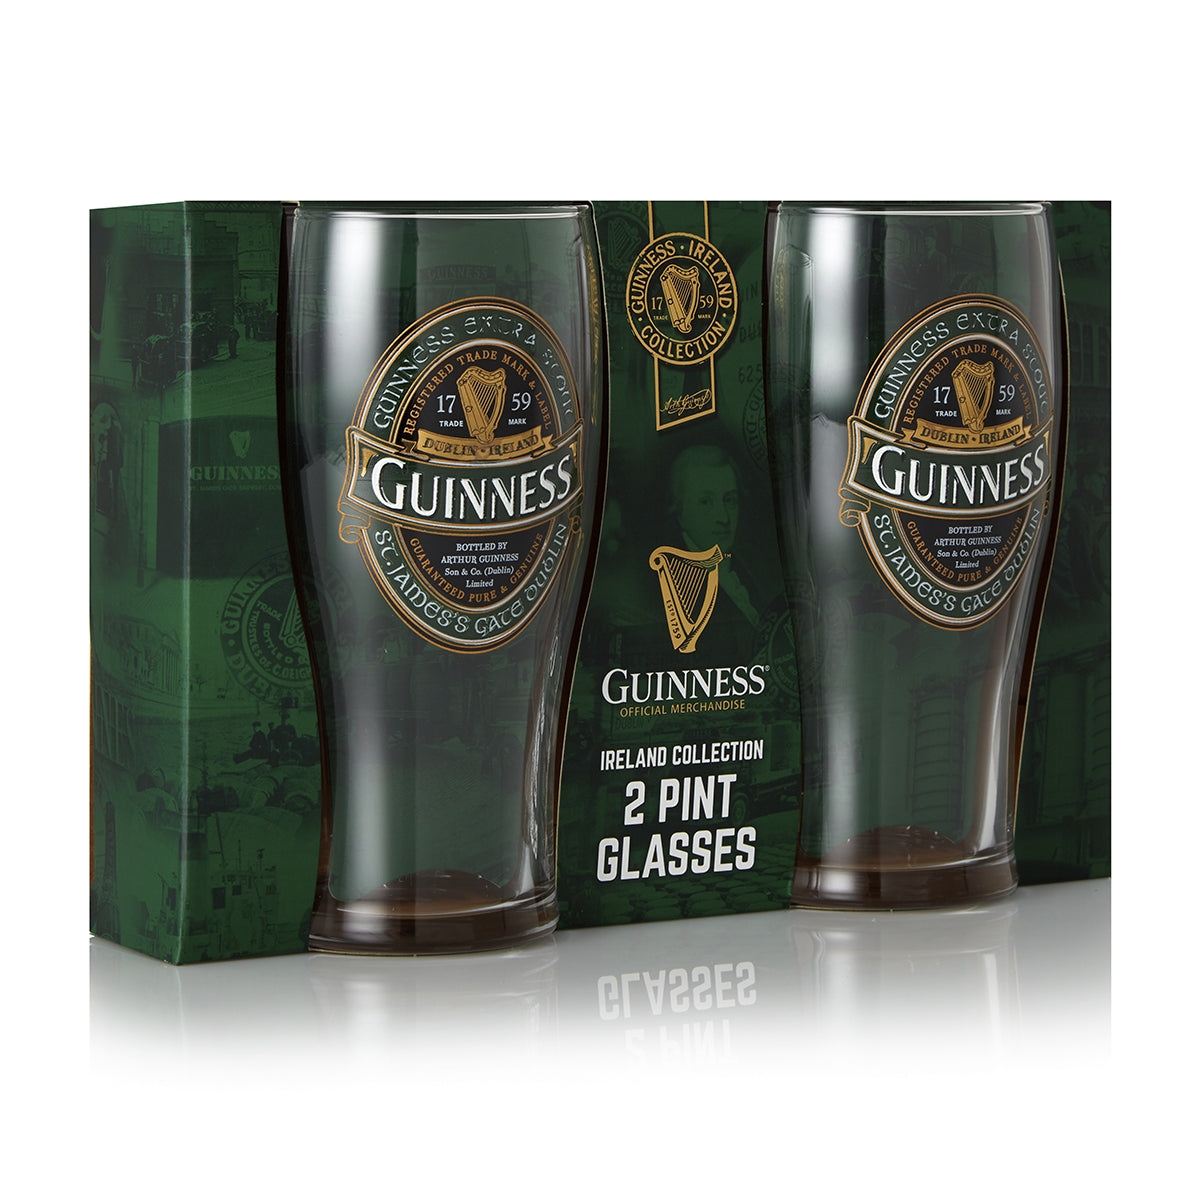 Guinness Ireland Collection Pint Glass Twin Pack featuring the Extra Stout Label.